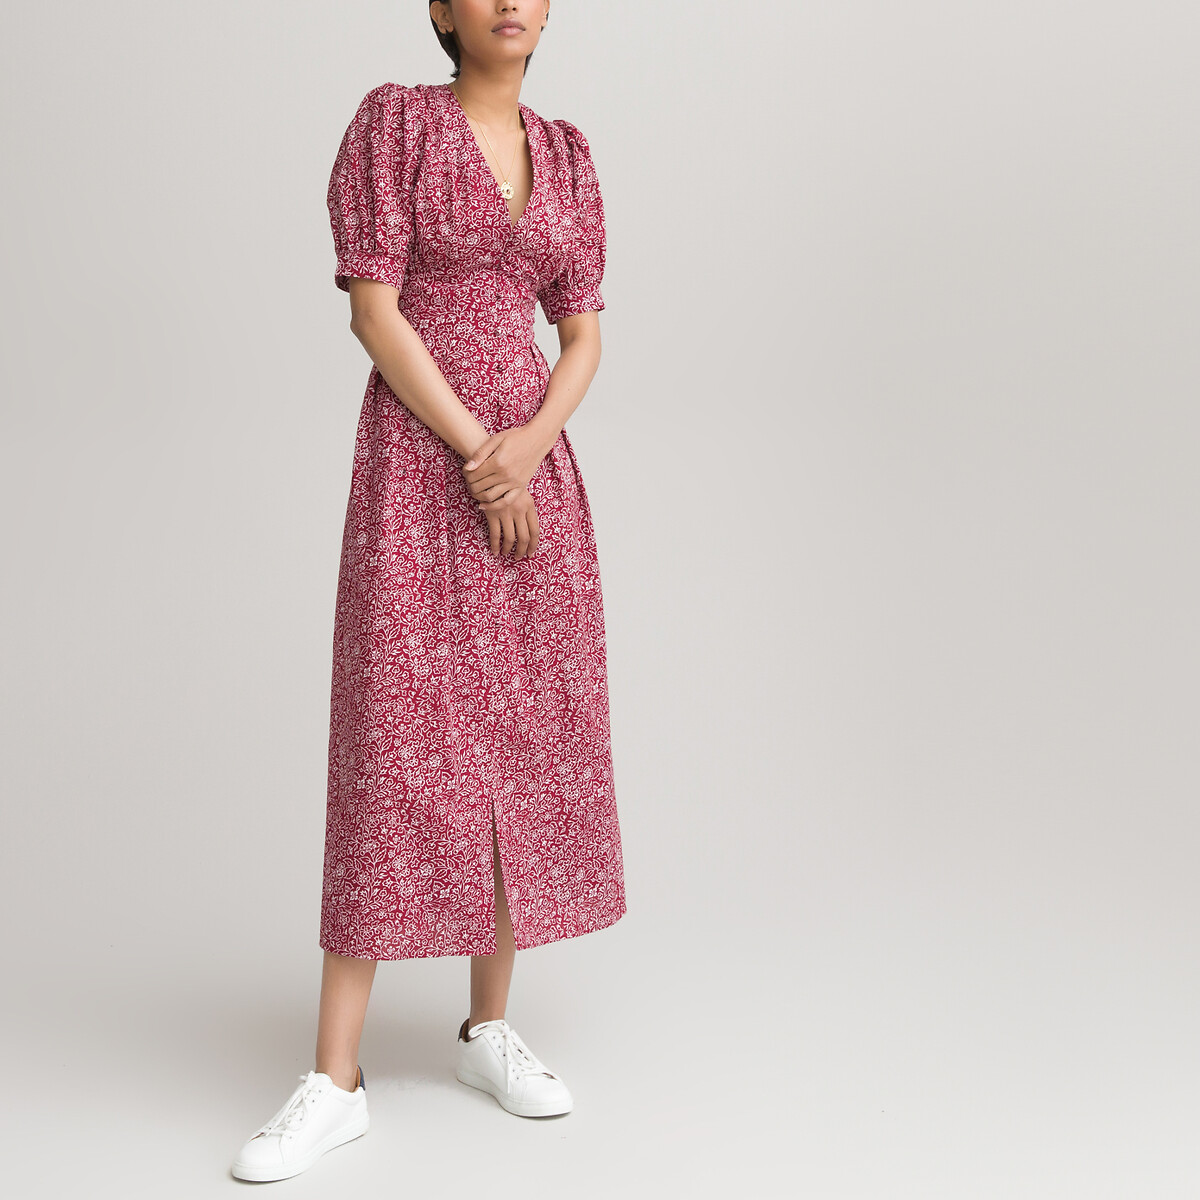 Printed maxi dress with v-neck and short sleeves plum print La 